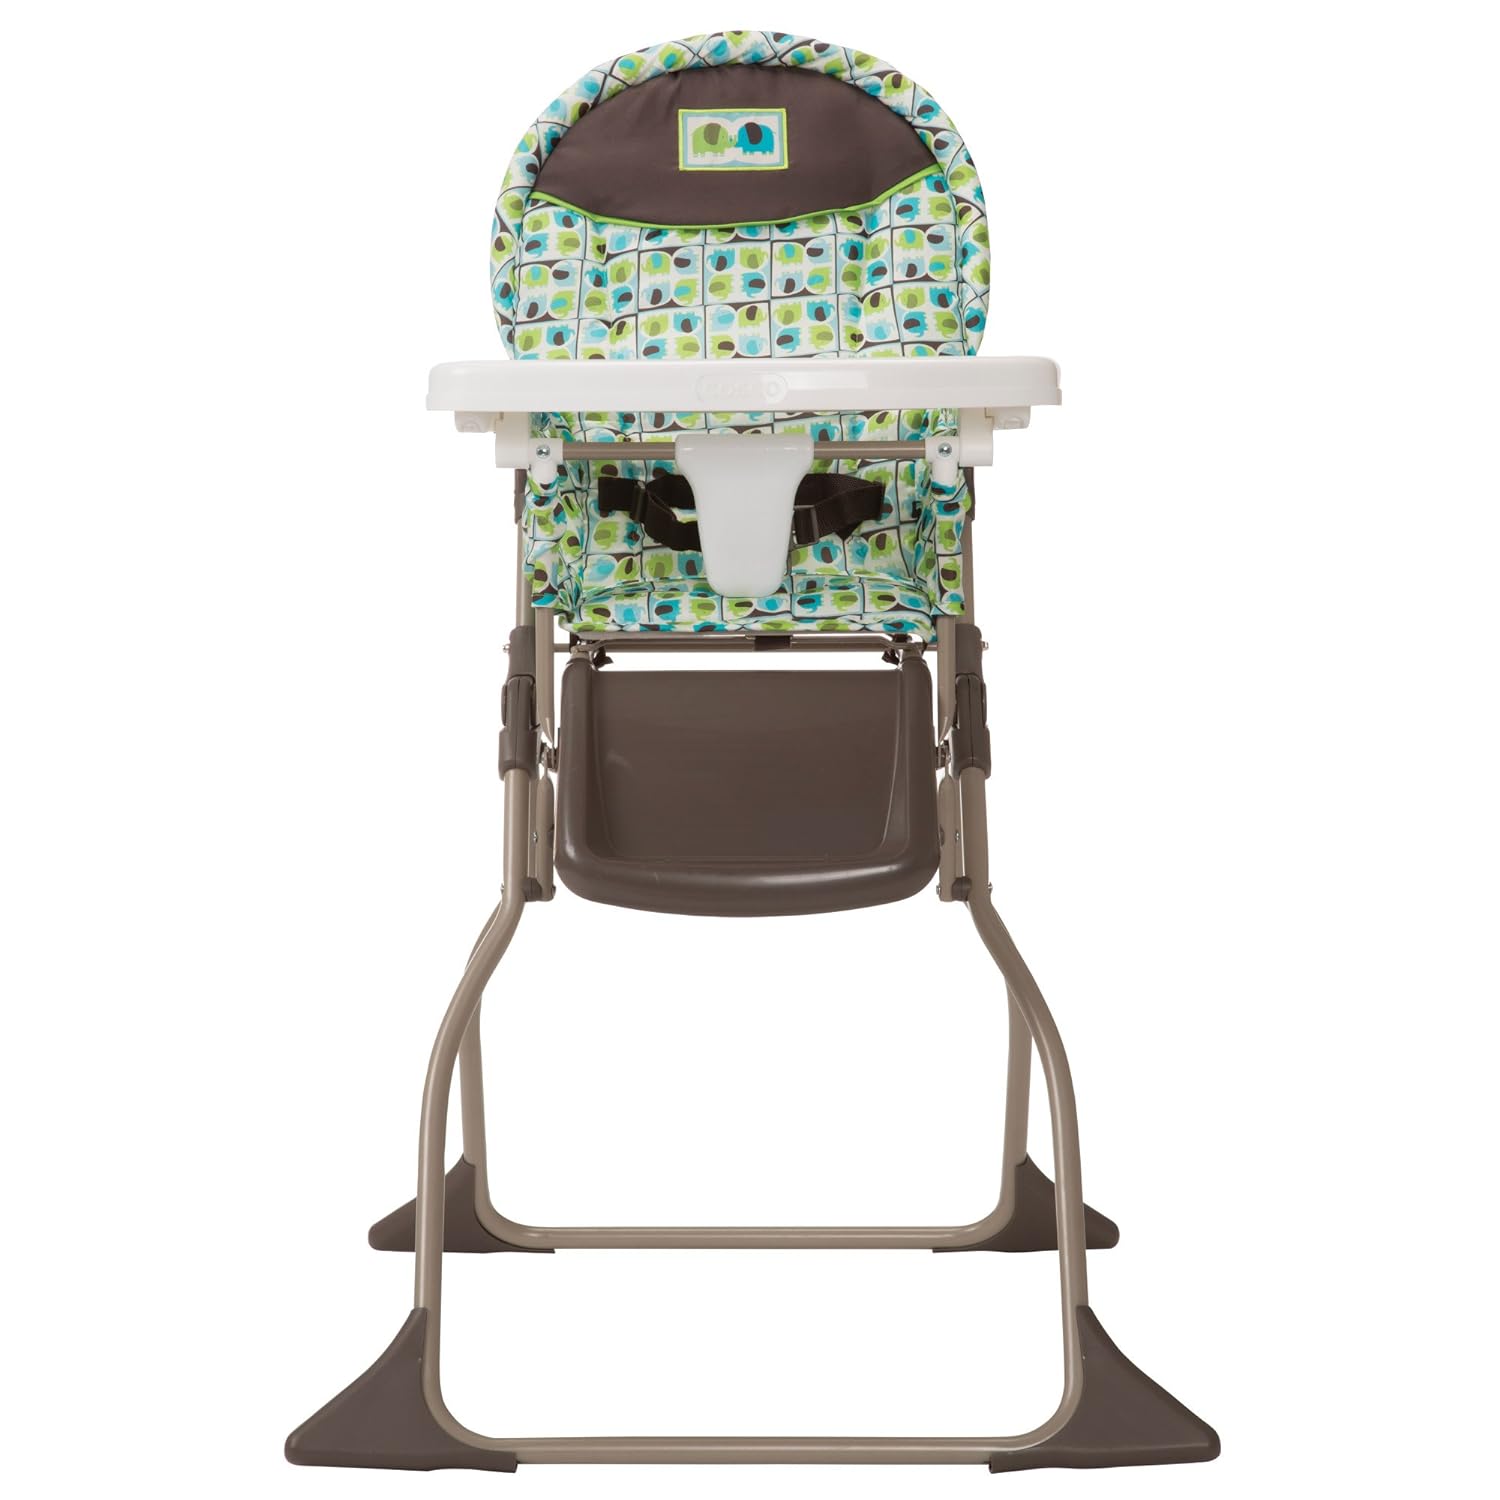 How To Fold Up A Cosco High Chair